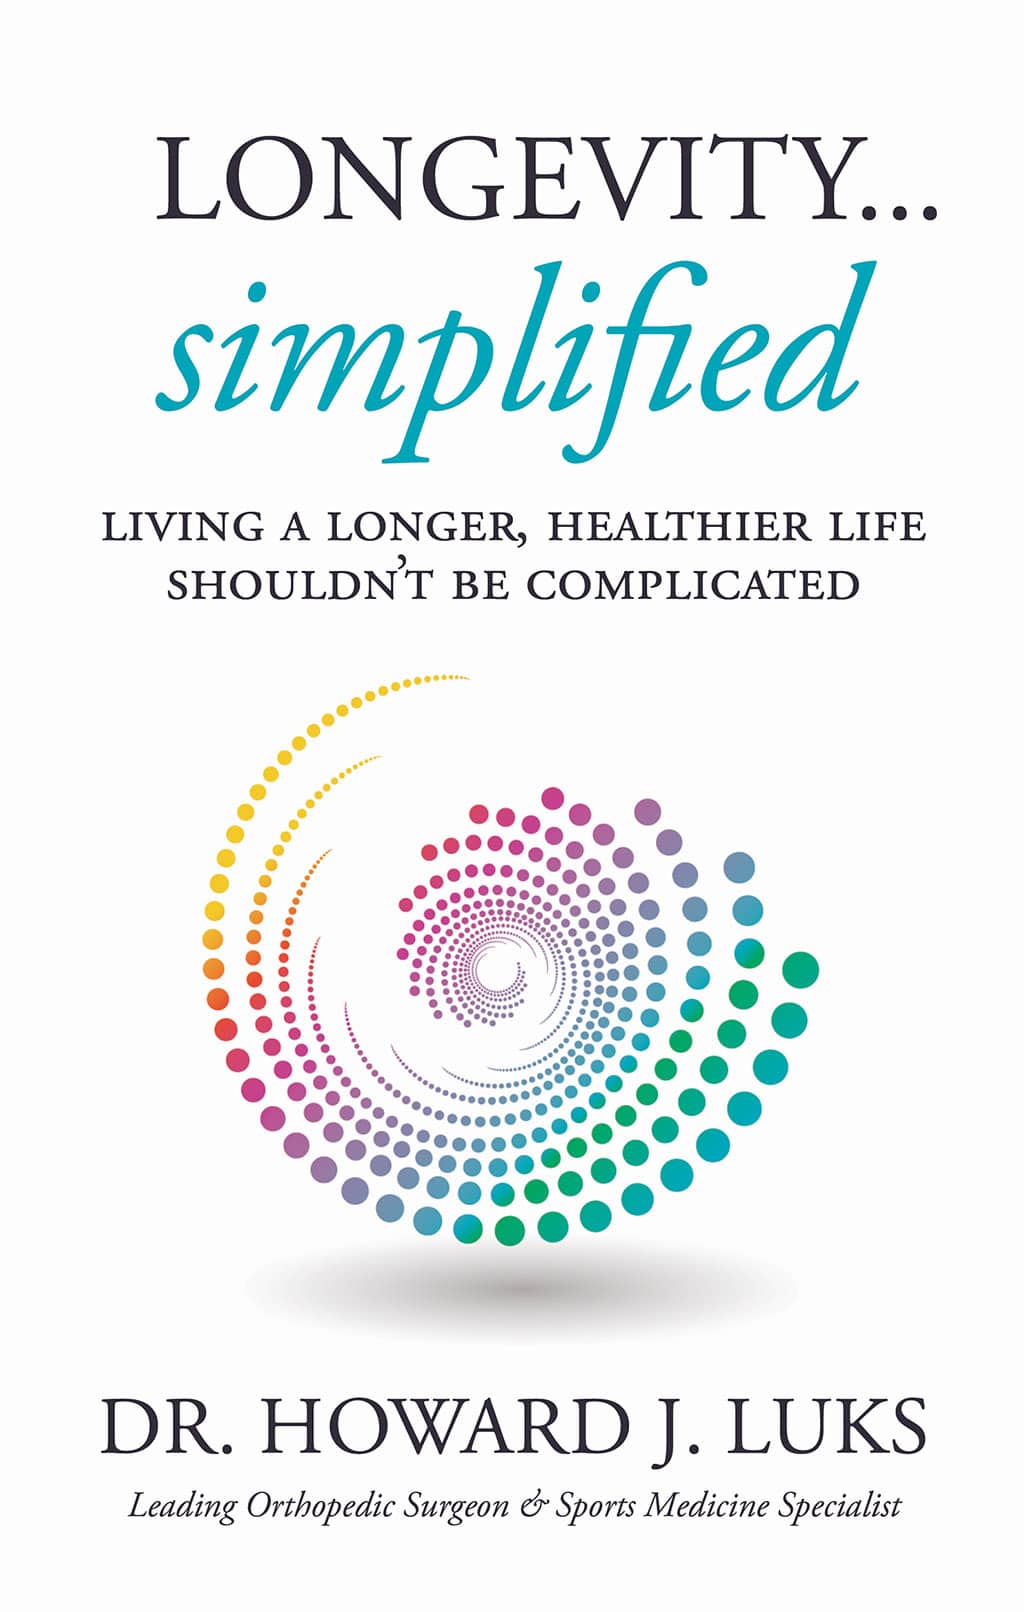 Longevity... Simplified - Living a longer, healthier life shouldn't be complicated. A book by Dr. Howard J. Luks, leading orthopedic surgeon & sports medicine specialist